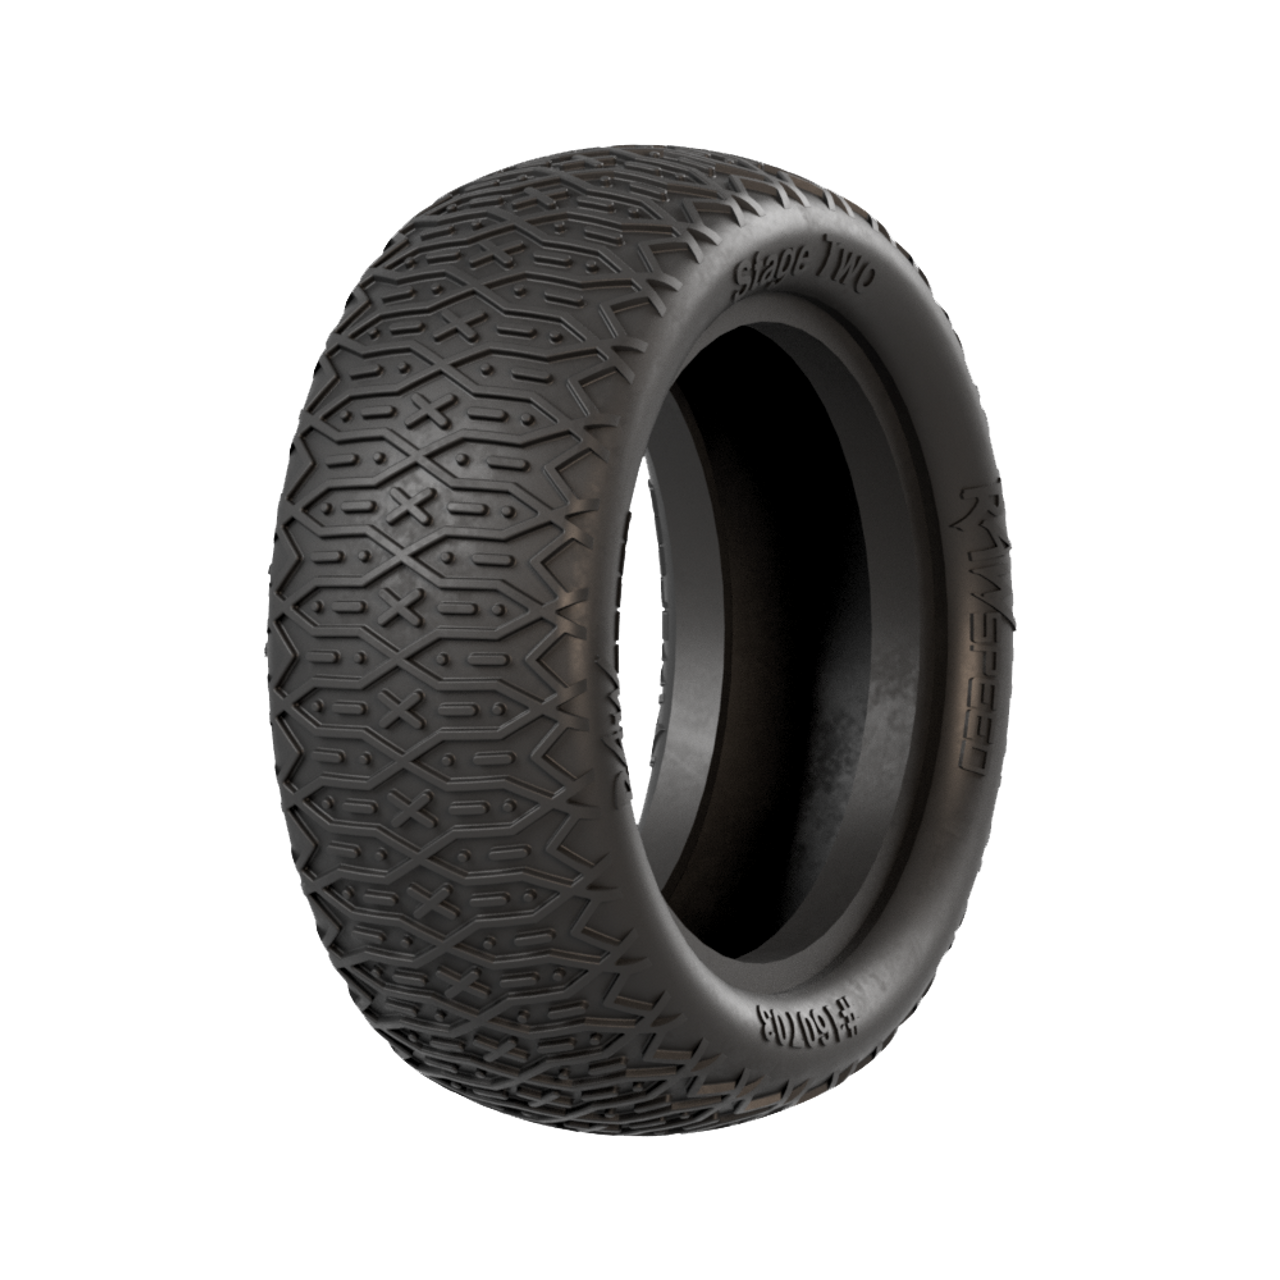 Raw Speed - Front 4WD Buggy Tires w/Inserts 2.2", 2-pack